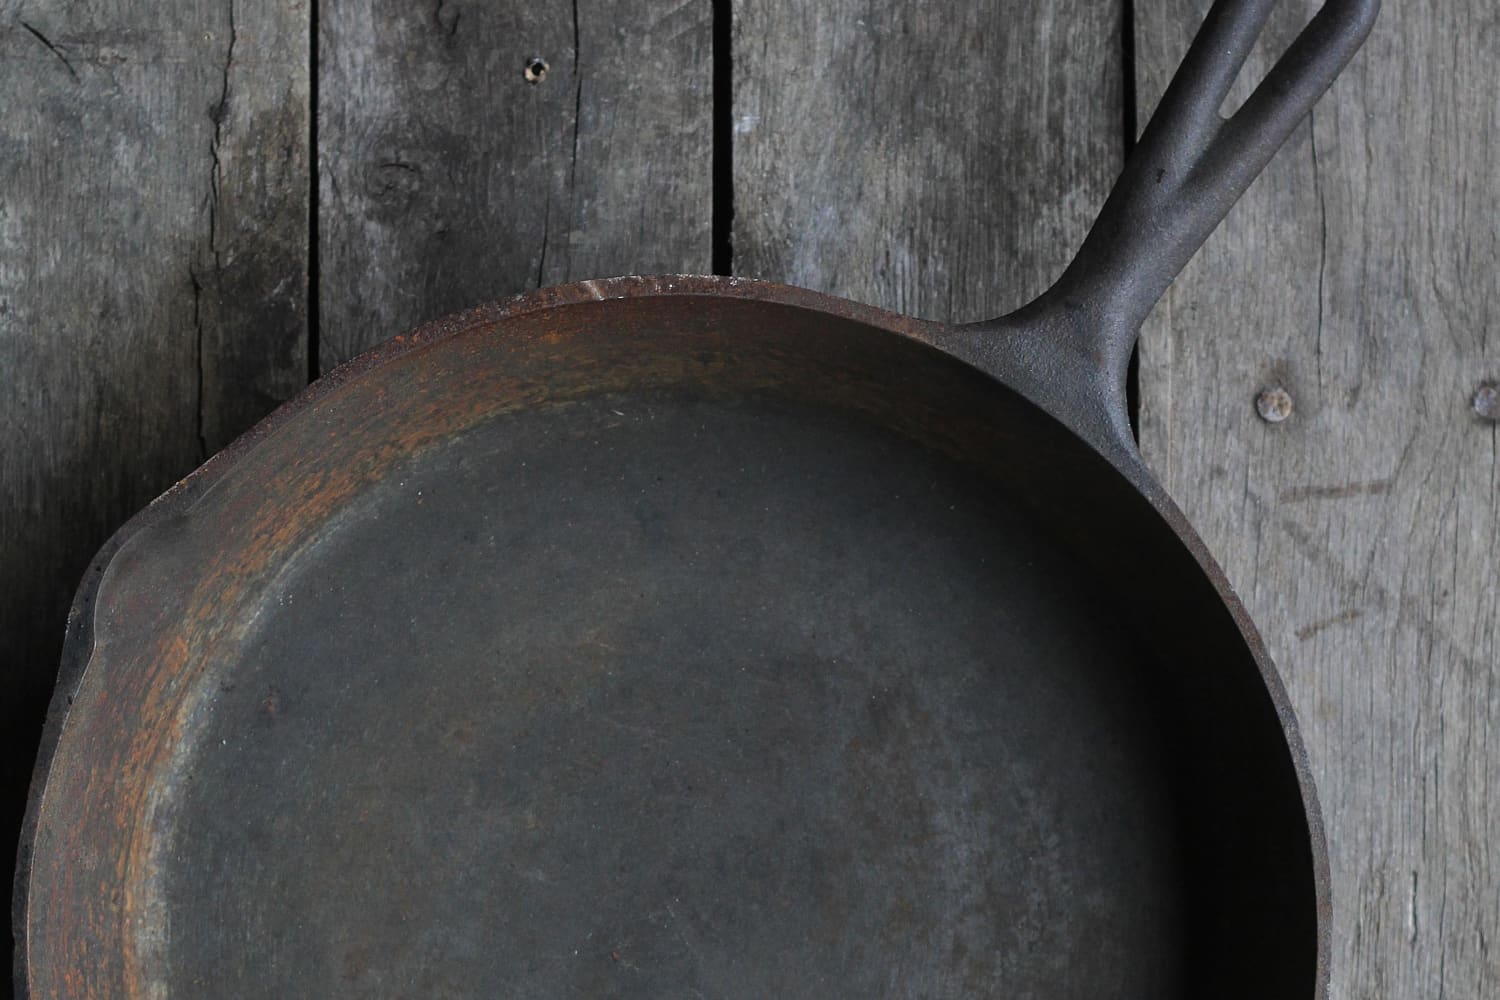 How to Clean a Cast-Iron Skillet in 4 Easy Steps